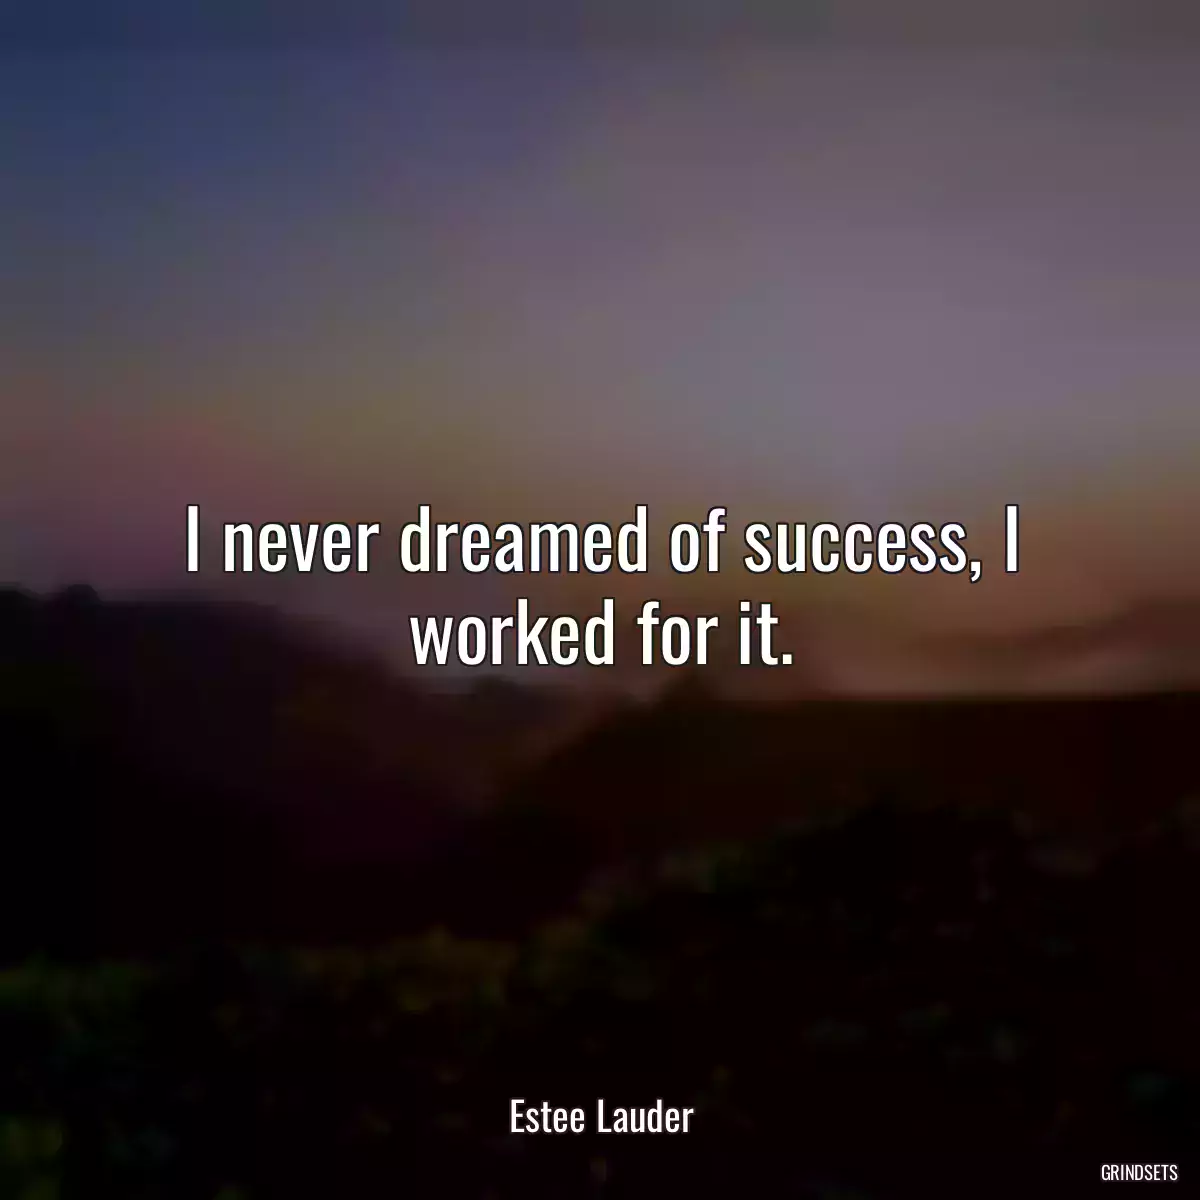 I never dreamed of success, I worked for it.